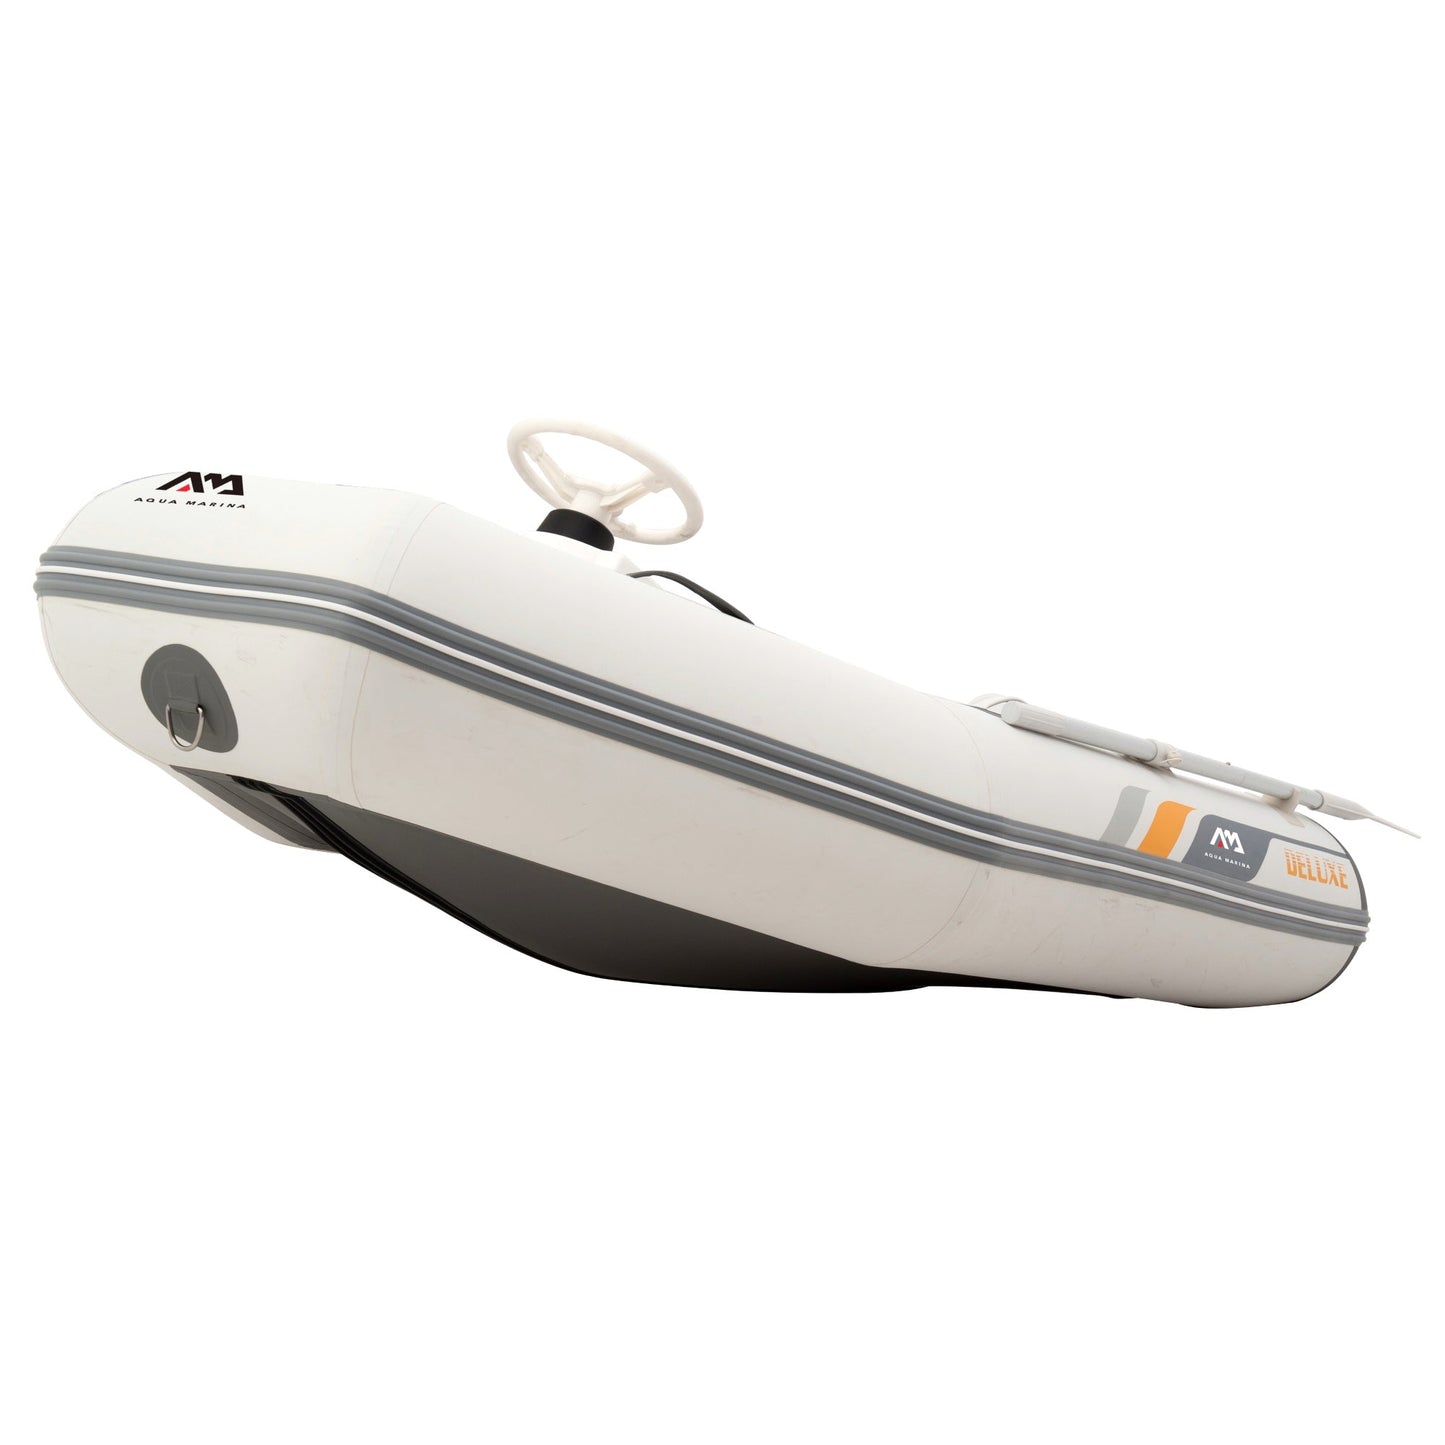 A-Deluxe 2.77m Inflatable Speed Boat (Aluminum Deck)